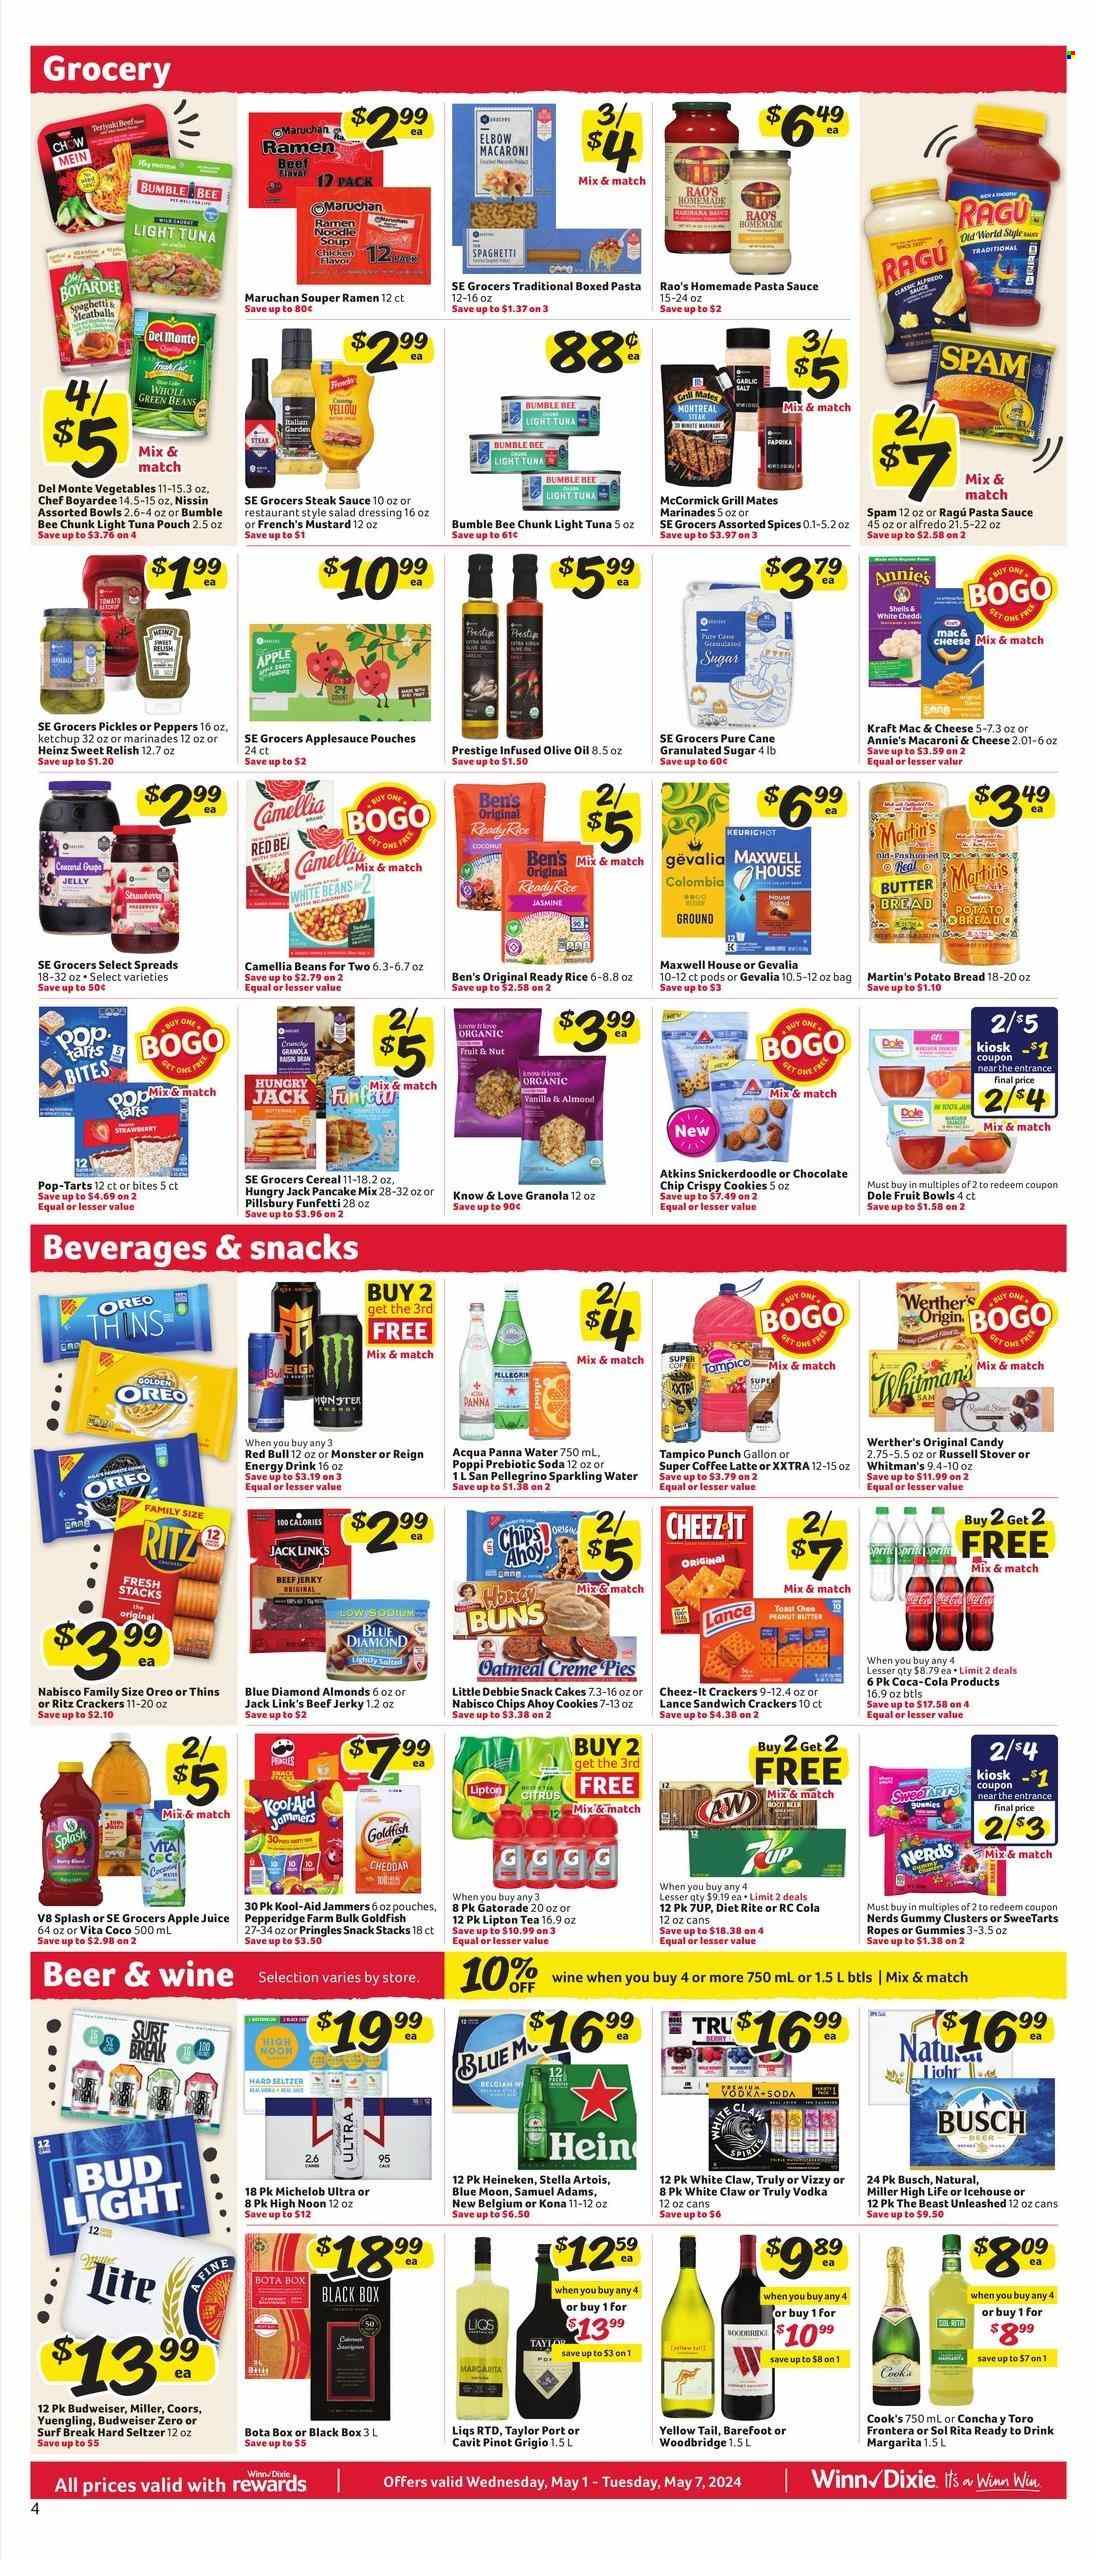 thumbnail - Winn Dixie Flyer - 05/01/2024 - 05/07/2024 - Sales products - ramen, bread, granola, Dole, fruit cup, Candy, Werther's Original, sweets, soda, sparkling water, San Pellegrino, water, beef jerky, jerky, Jack Link's, almonds, Blue Diamond, crackers, Cheez-It, salty snack, Lipton, ice tea, Gatorade, electrolyte drink, Cook's, wine, ready to drink spirits, Busch, Miller, alcohol, vodka, White Claw, Hard Seltzer, TRULY, Budweiser, non-alcoholic beer, Surf, Coors, Yuengling, white wine, Pinot Grigio, Woodbridge, Maxwell House, coffee pods, Gevalia, bag, ready meal, rice sides, Uncle Ben's, cookies, pasta, pasta sauce, spaghetti sauce, sauce, mustard, salad dressing, steak sauce, dressing, olive oil, oil, tuna, Bumble Bee, canned tuna, light tuna, canned fish, spice, marinade, cane sugar, granulated sugar, sugar, peppers, Heinz, pickles, relish, pickled vegetables, ketchup, beer, Stella Artois, Heineken, Blue Moon, Spam, apple sauce, macaroni & cheese, Annie's, Kraft®, snack bar, Pop-Tarts, pancake mix, Pillsbury, cereals, energy drink, Monster, Red Bull, RITZ, Nabisco, Thins, fruit punch, coffee, snack, snack cake, Coca-Cola, soft drink, carbonated soft drink, apple juice, juice, fruit drink, Pringles, chips, Goldfish, gummies, Michelob, 7UP, beans, instant noodles, Nissin, canned vegetables, Chef Boyardee, Del Monte. Page 8.